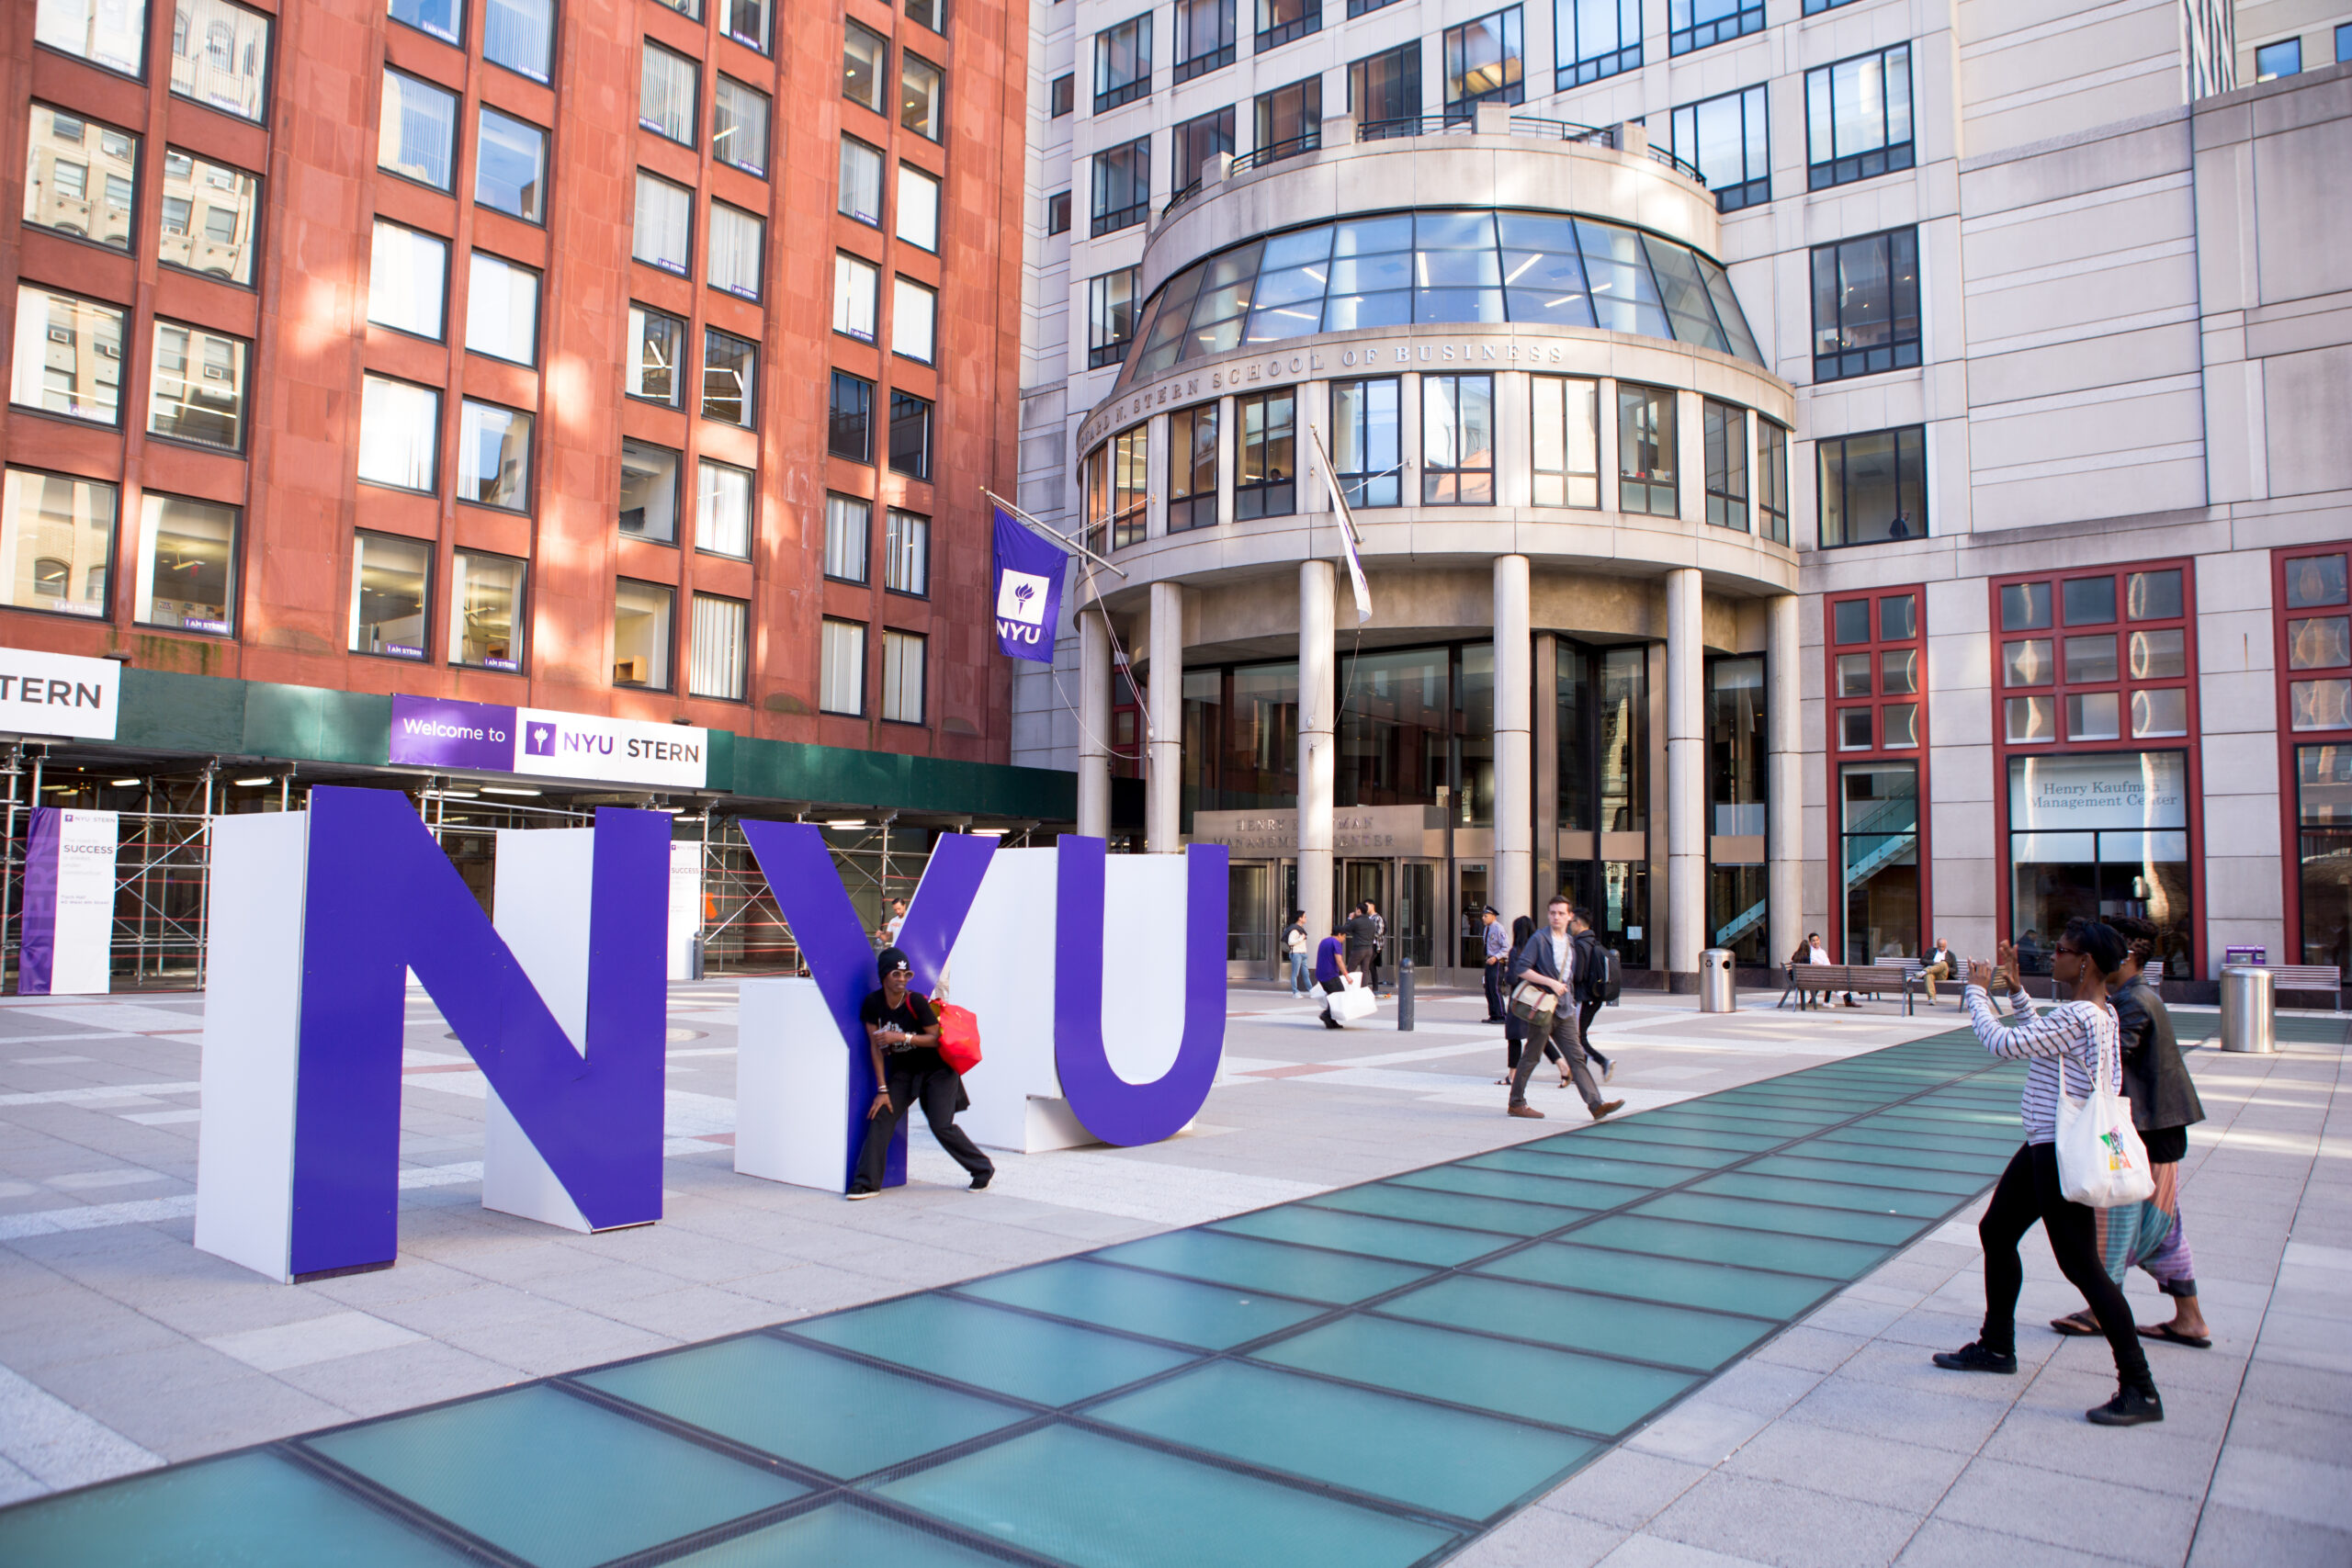 A student of color taking photos next to large sculptural letters that spell “NYU.”